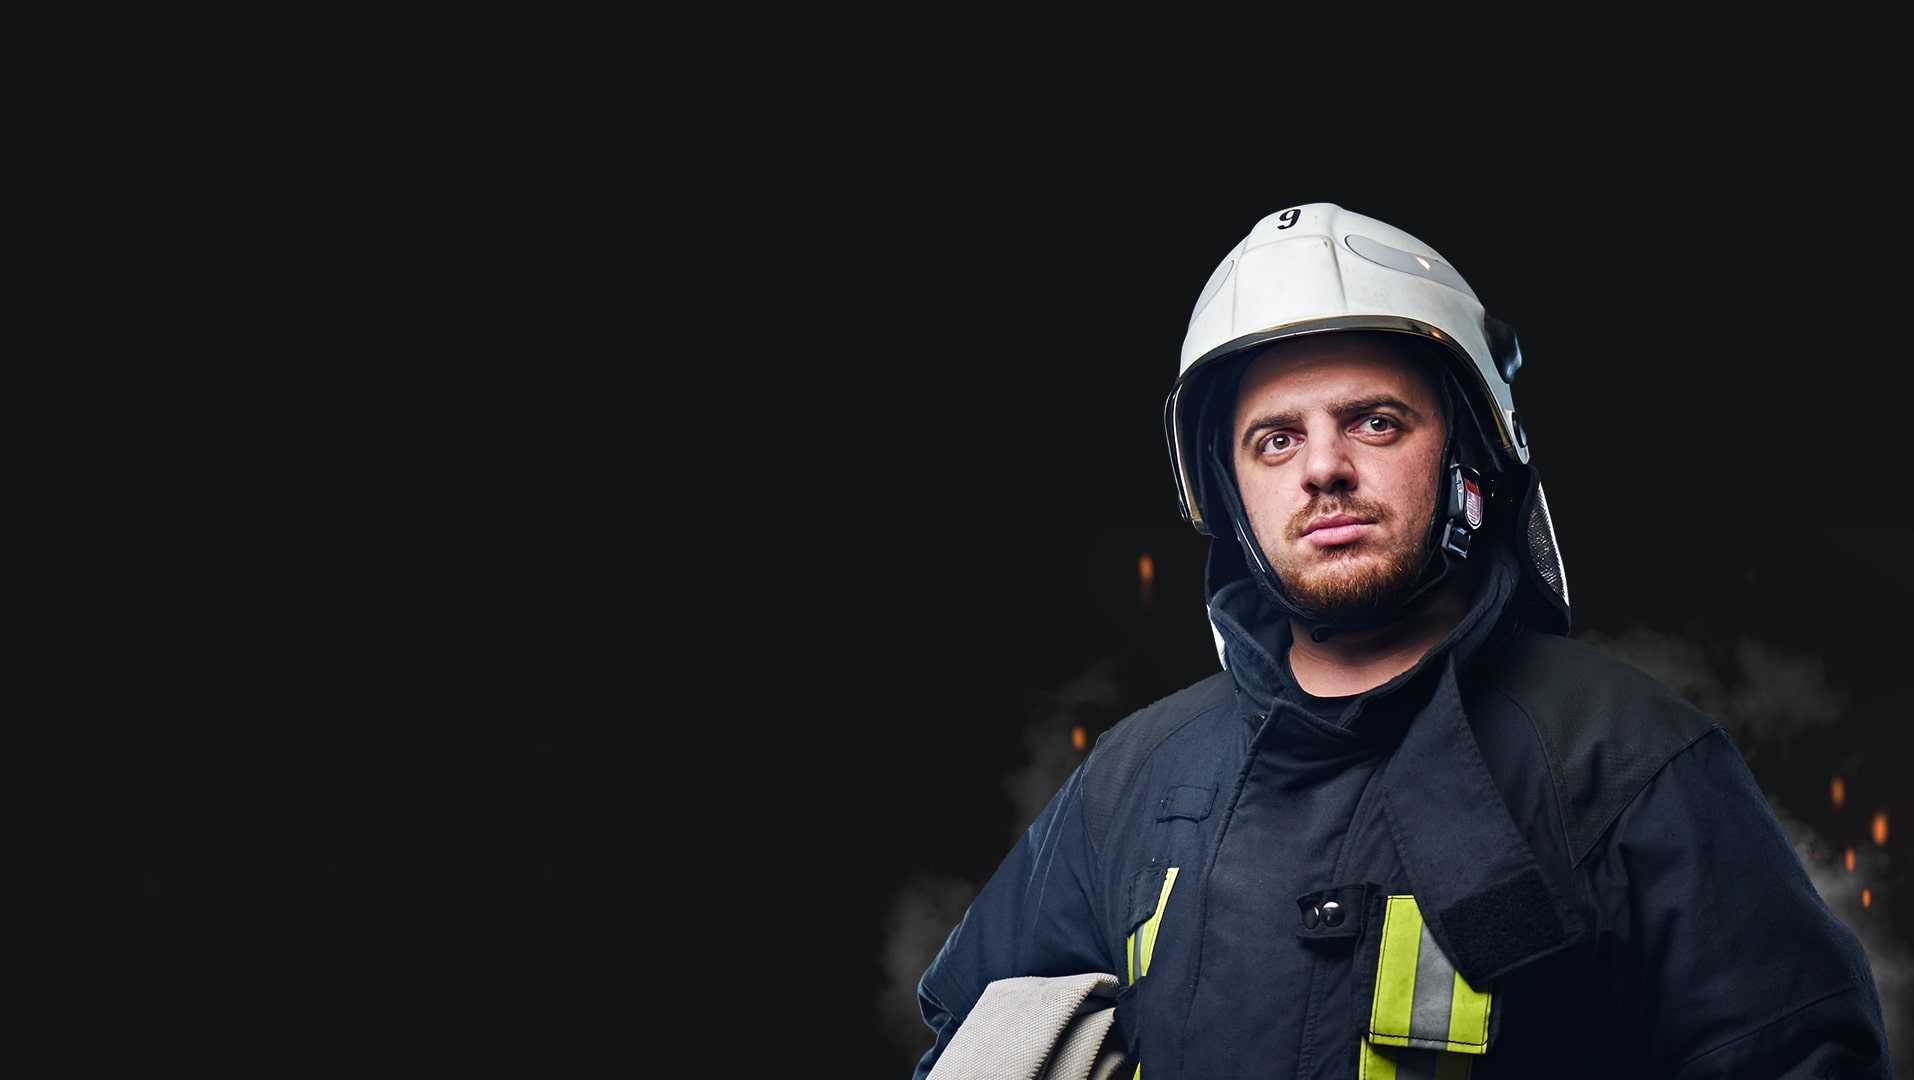 Fully equipped firefighter on a black background